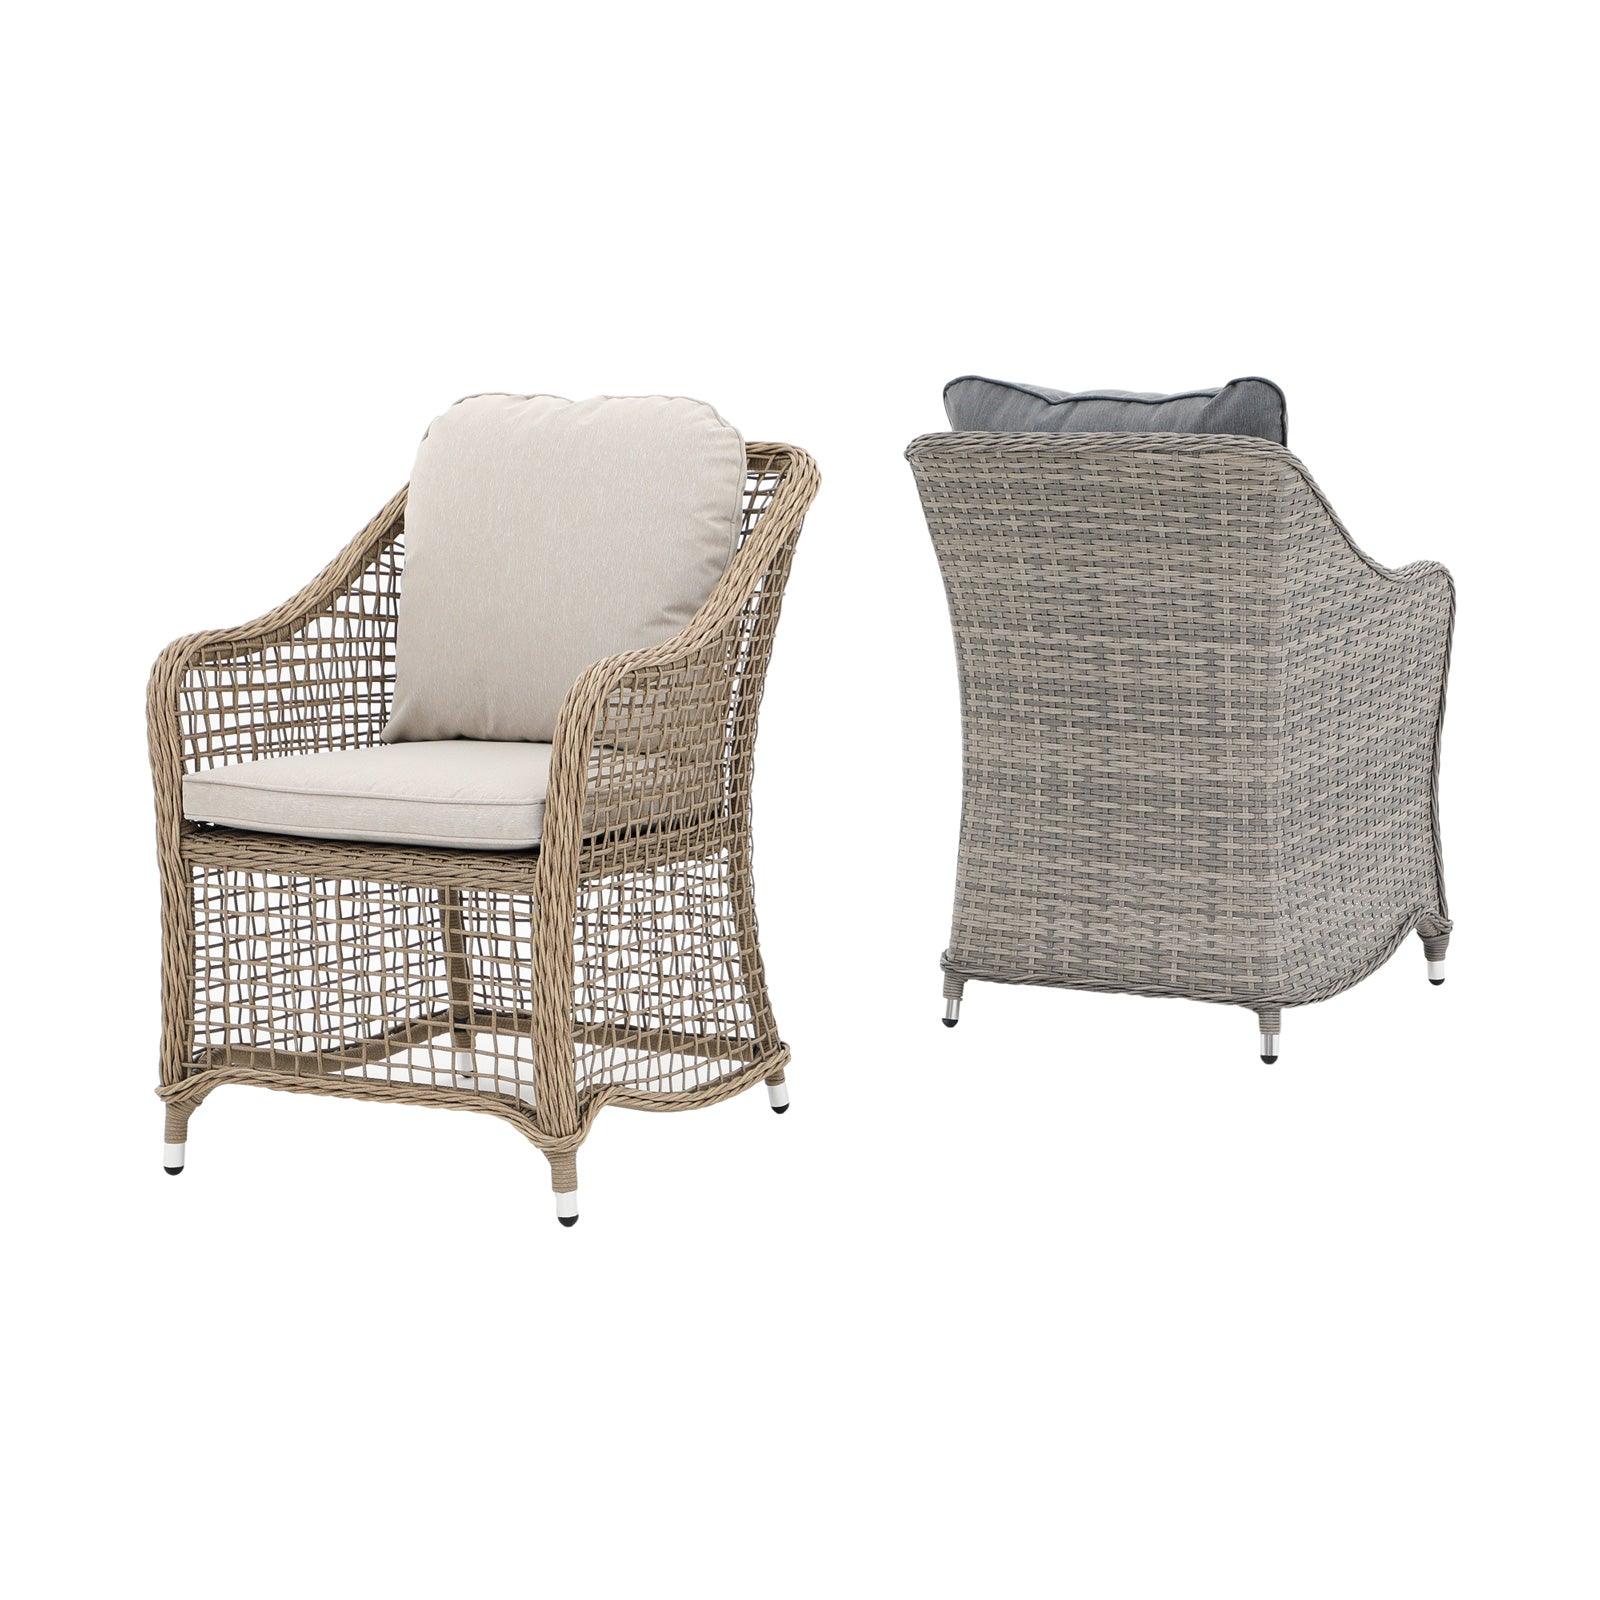 Irati wicker dining chairs, grey and natural, two different angle-Jardina furniture